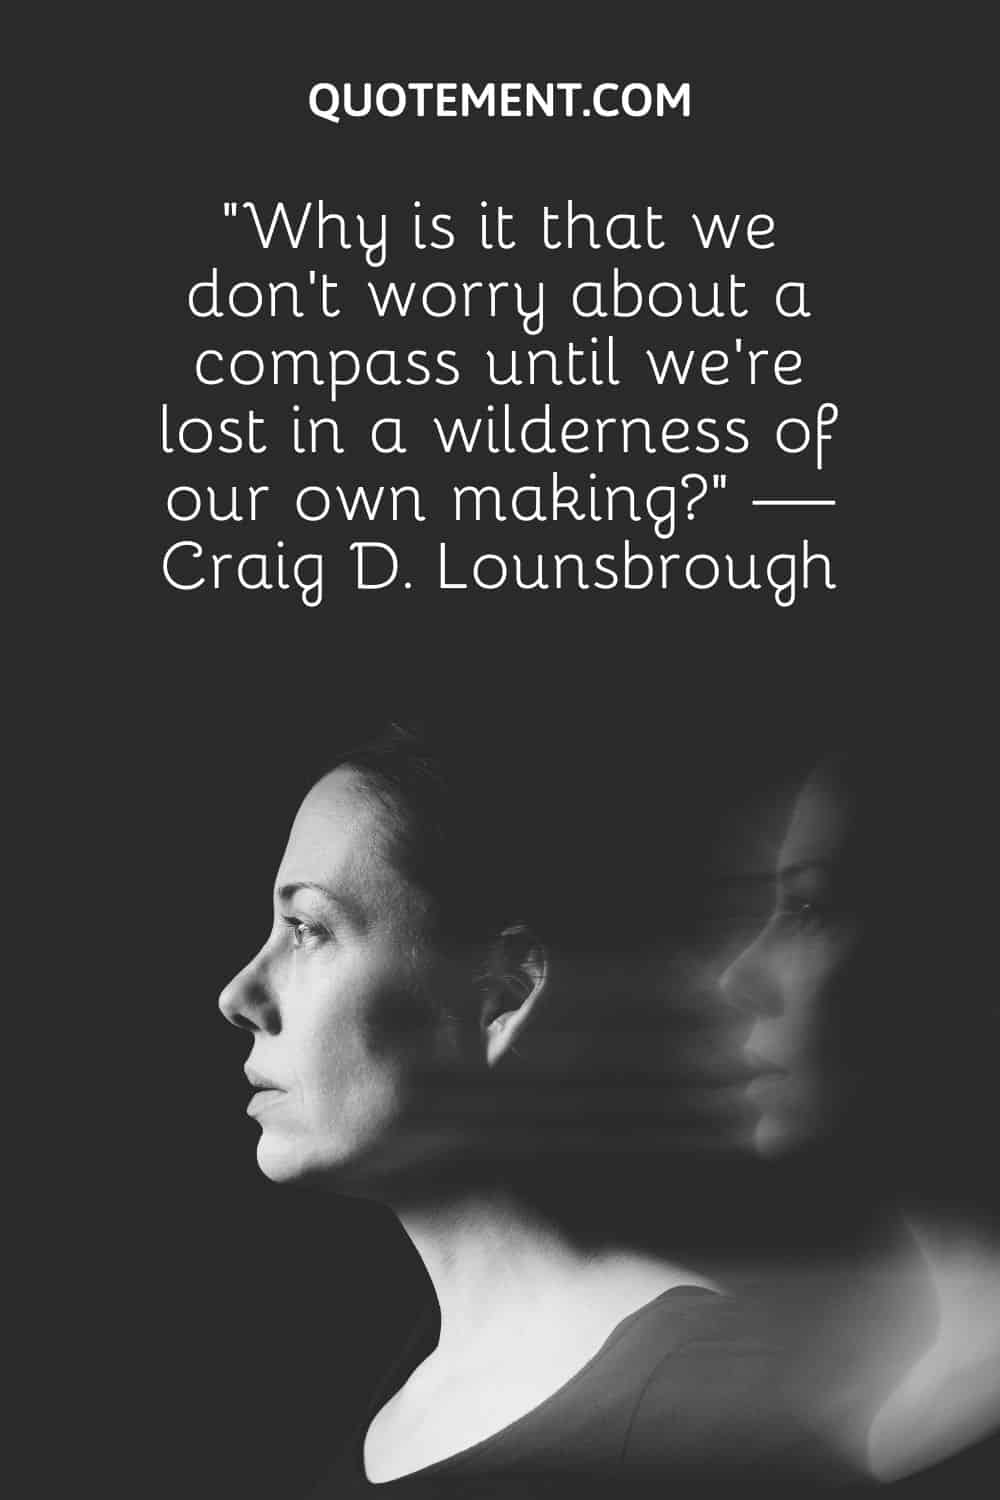 Why is it that we don’t worry about a compass until we’re lost in a wilderness of our own making” — Craig D. Lounsbrough